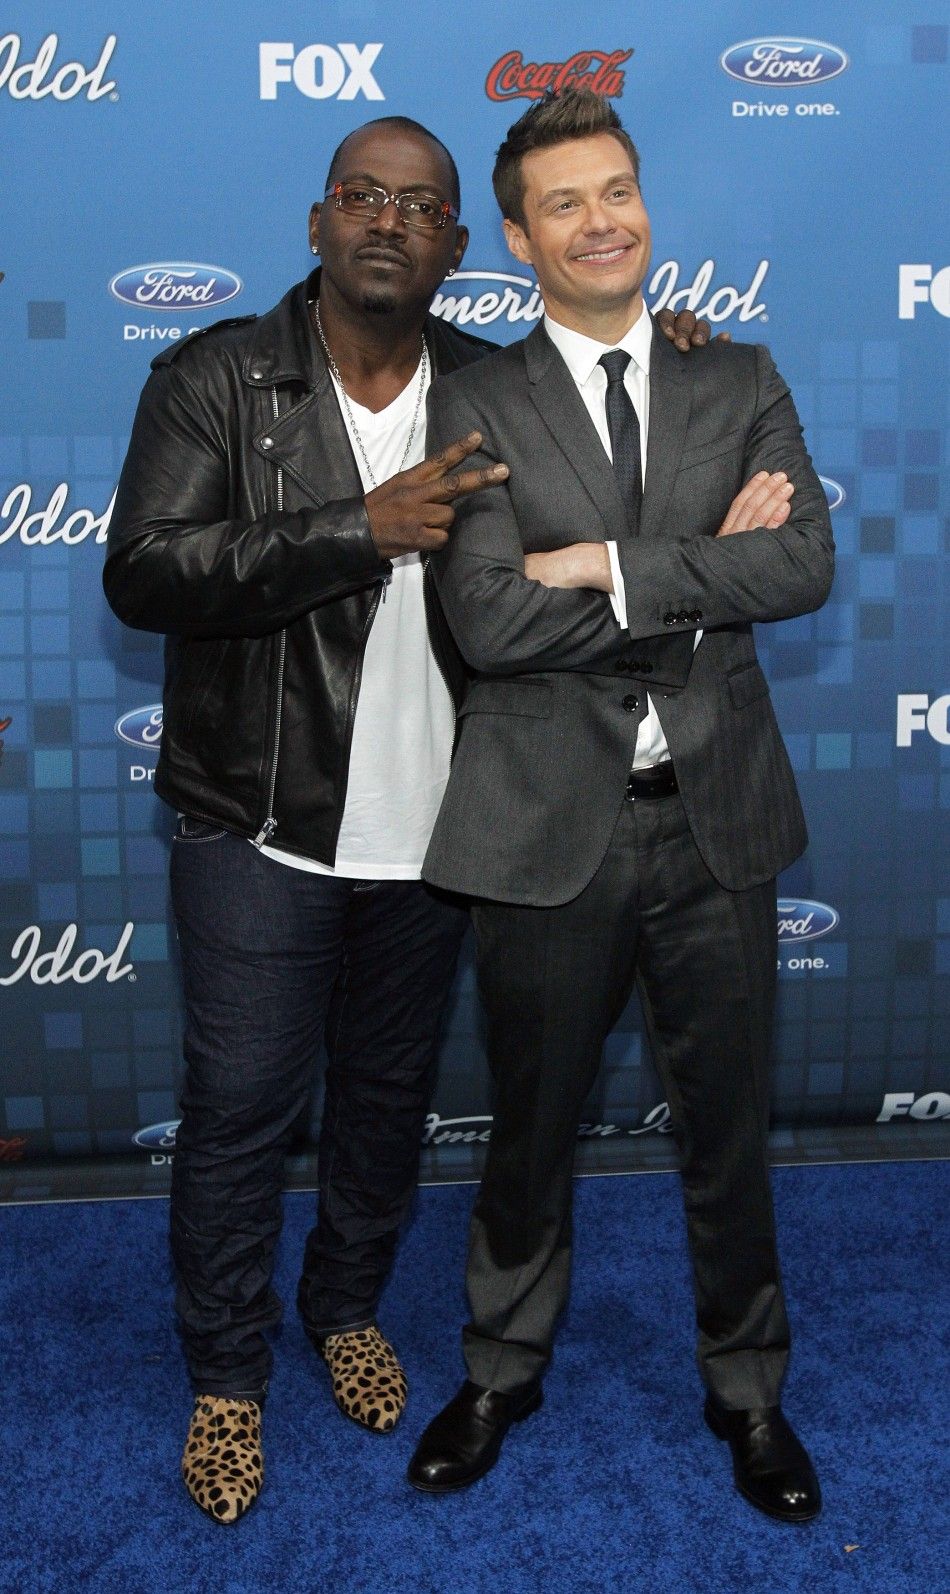 American Idol judge Randy Jackson L and show host Ryan Seacrest pose at the party for the finalists of the television show quotAmerican Idolquot in Los Angeles March 3, 2011.